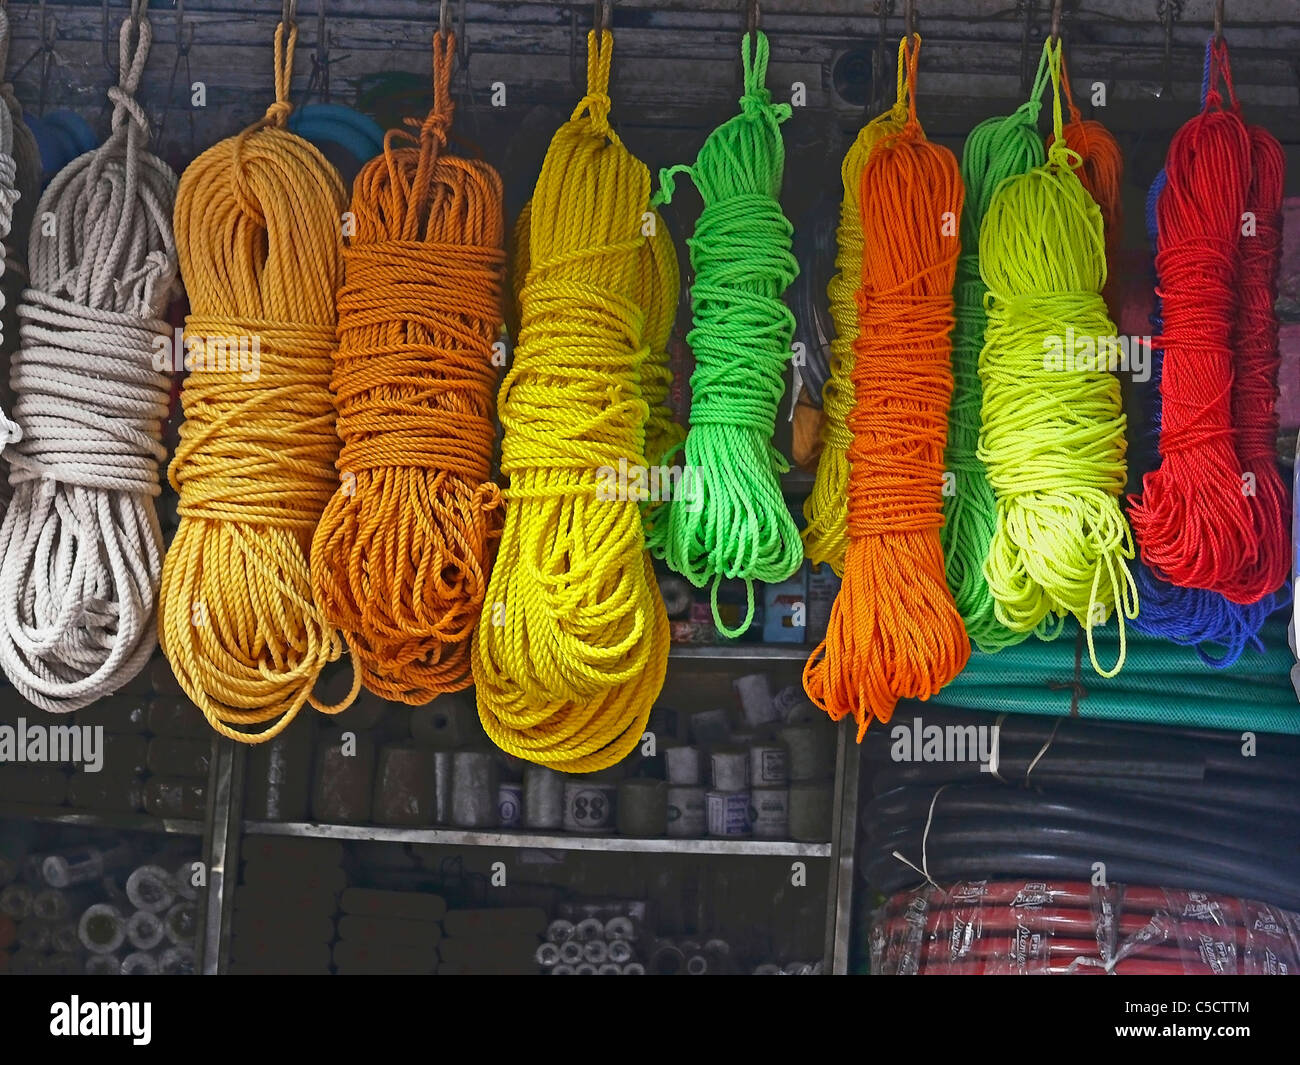 Bundles of Nylon heavy-duty commercial quality rope are displayed